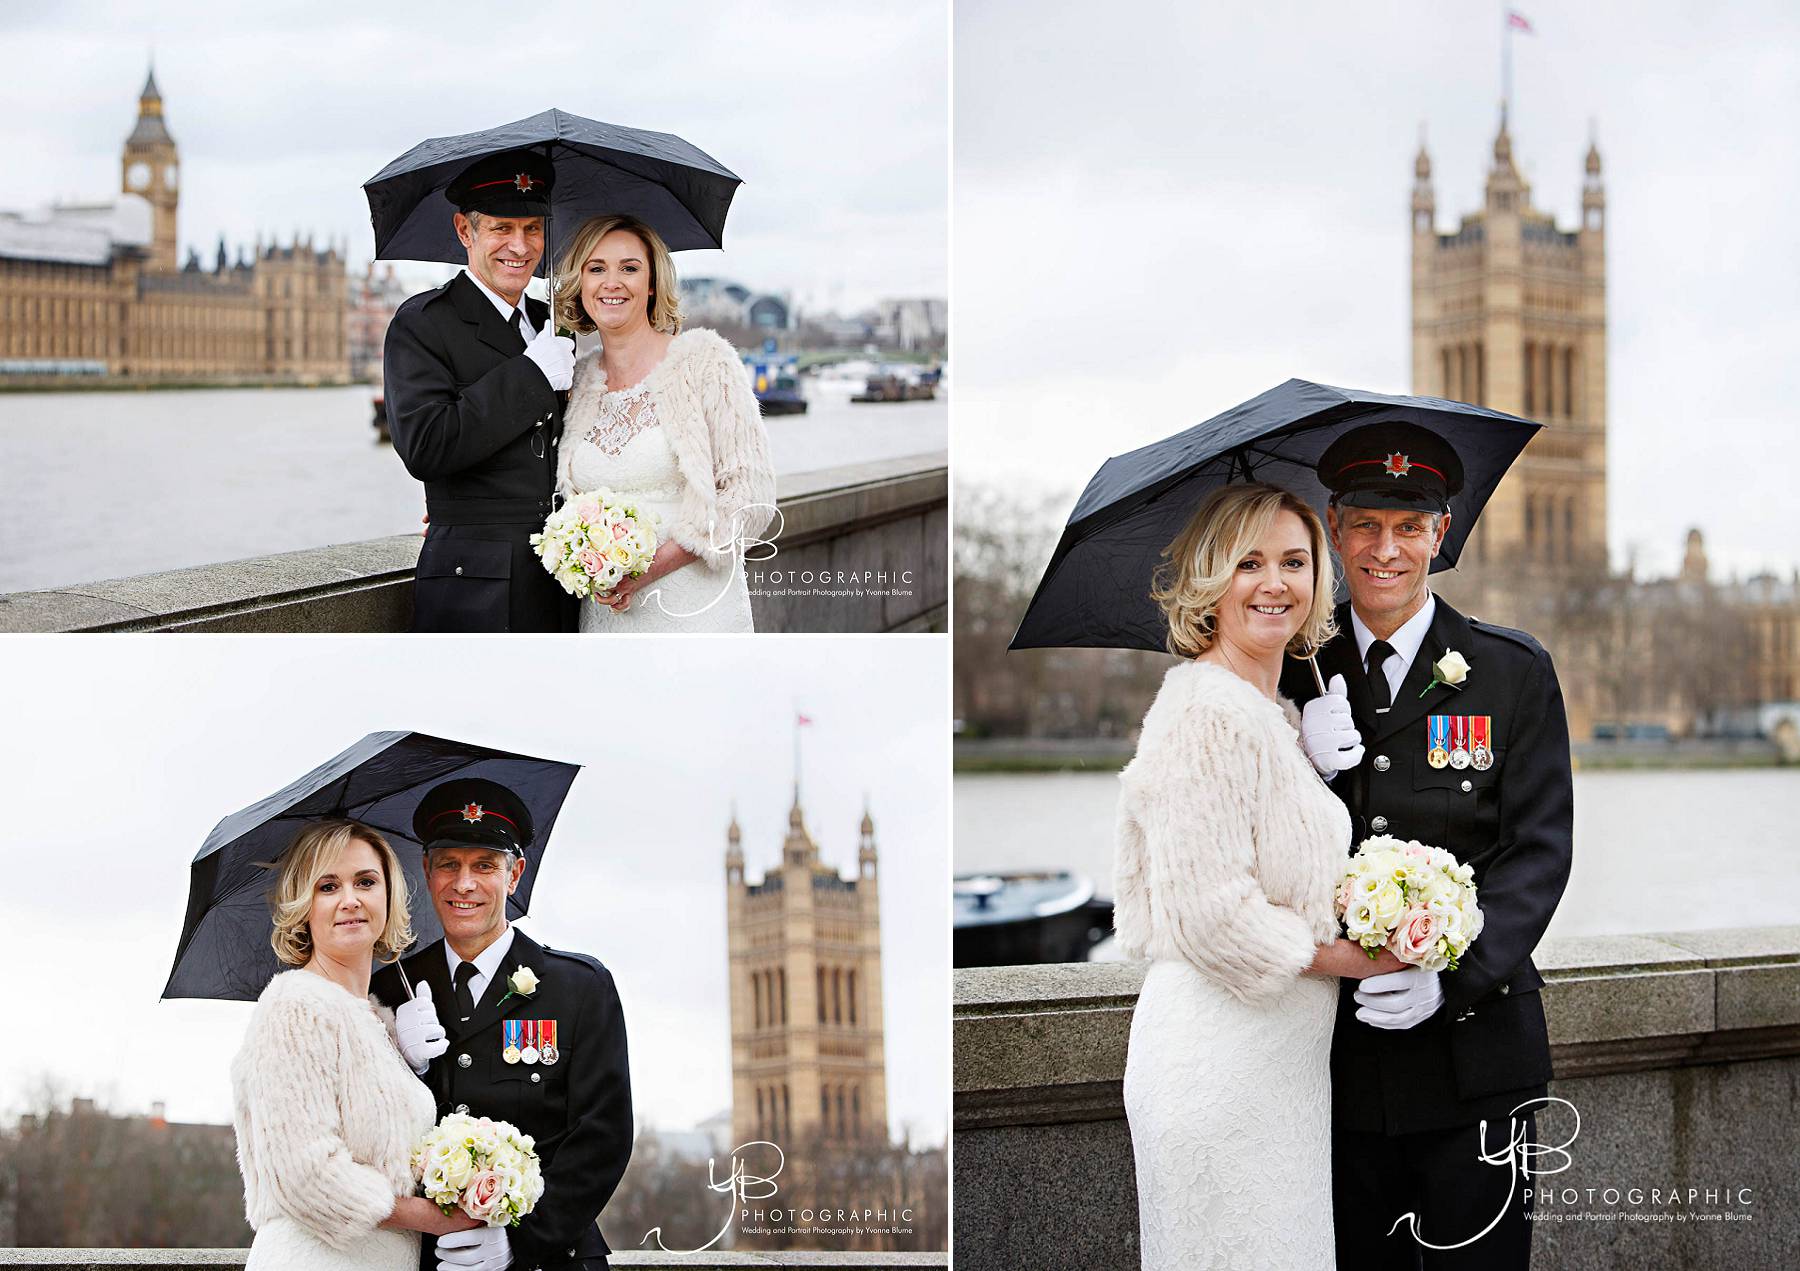 Bride and groom in the rain at Westminster and the Houses of Parliament